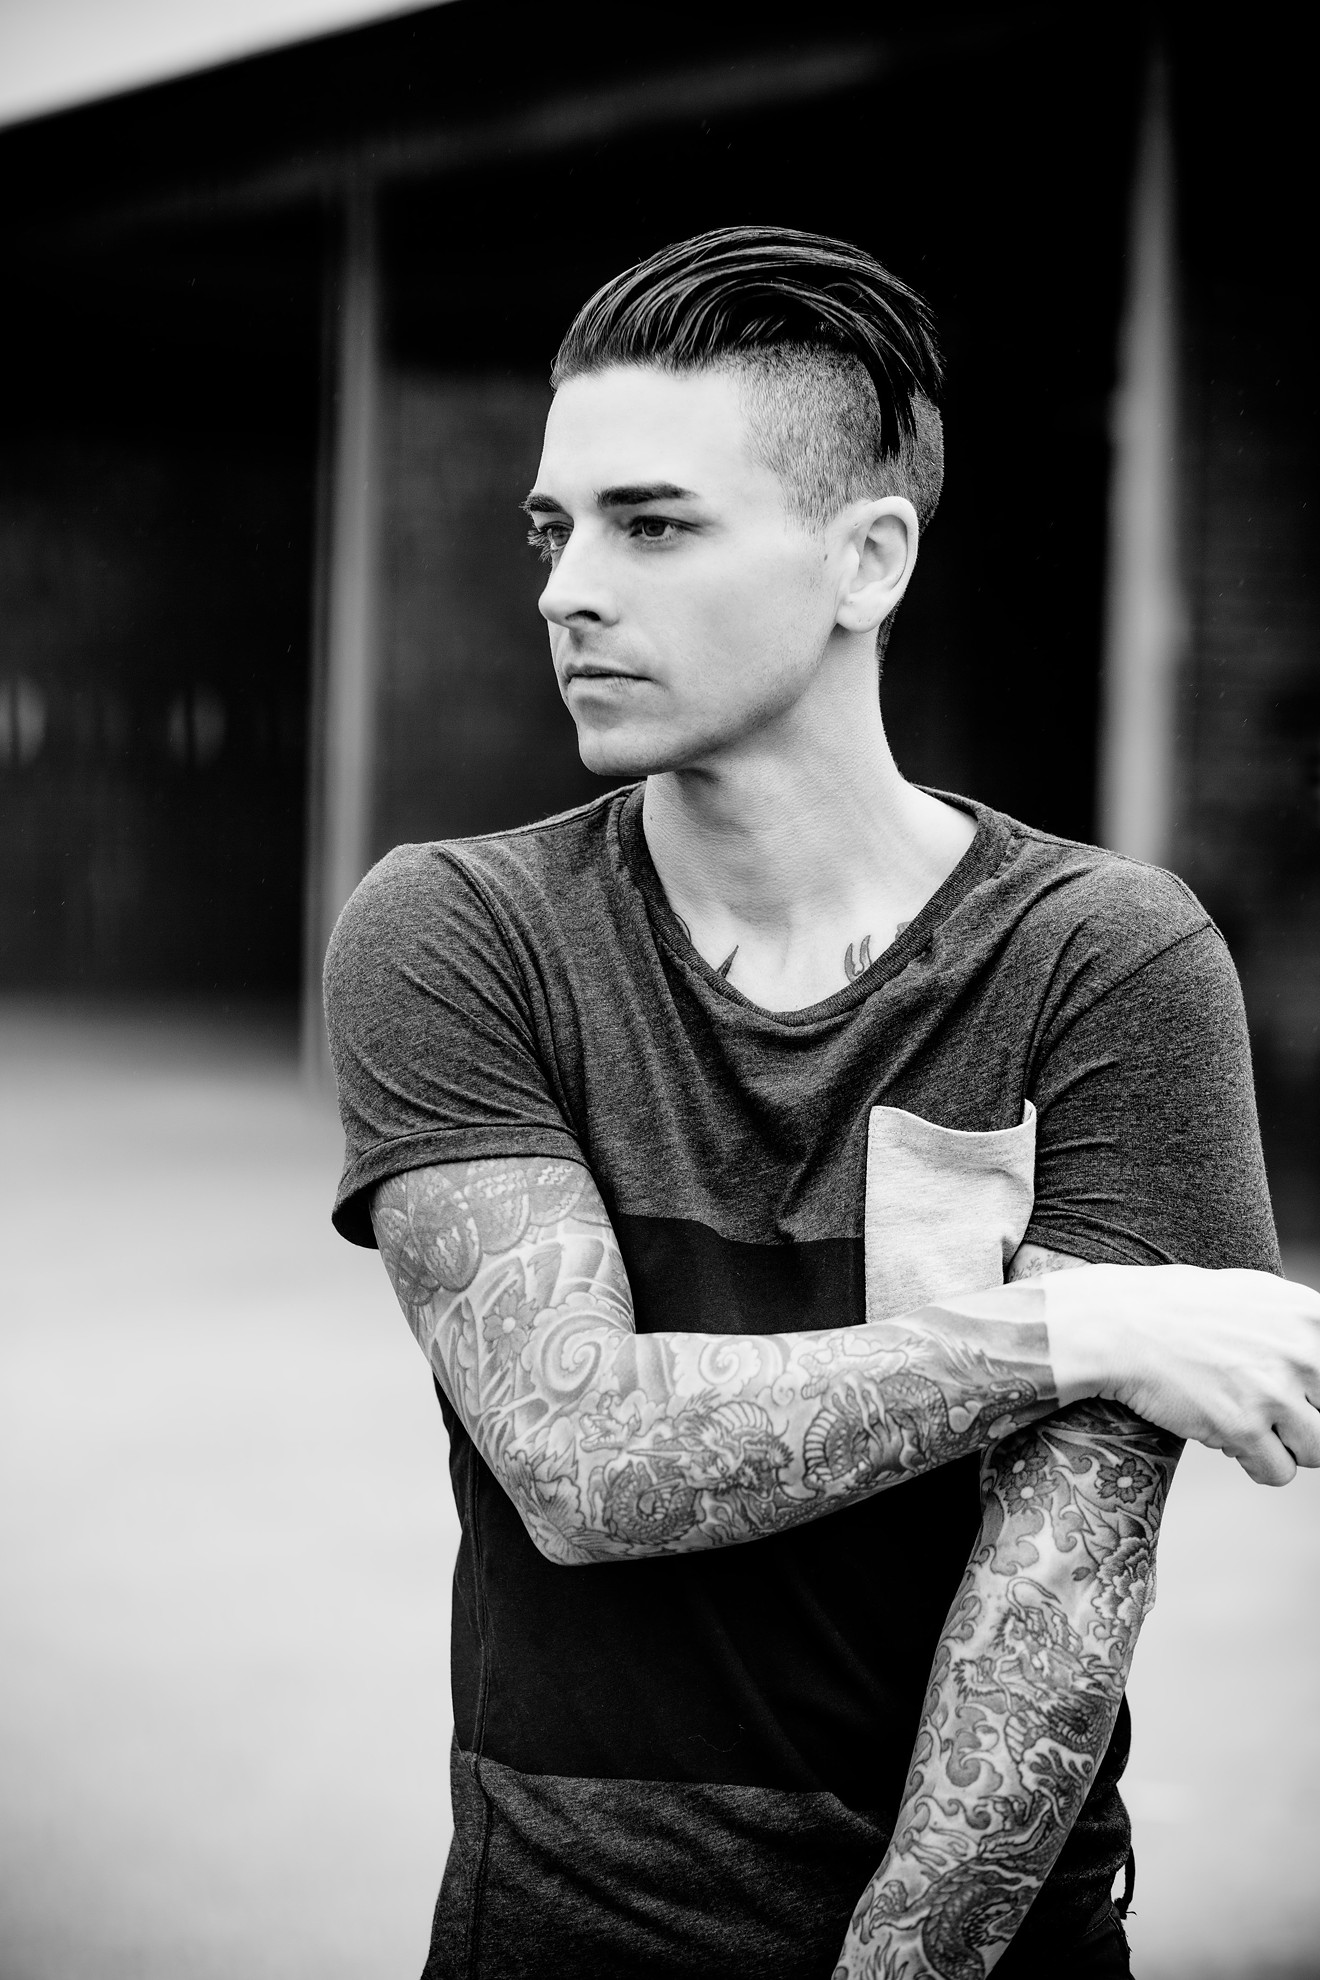 Chris Carrabba of Dashboard Confessional embraces his role in the Emo genre.